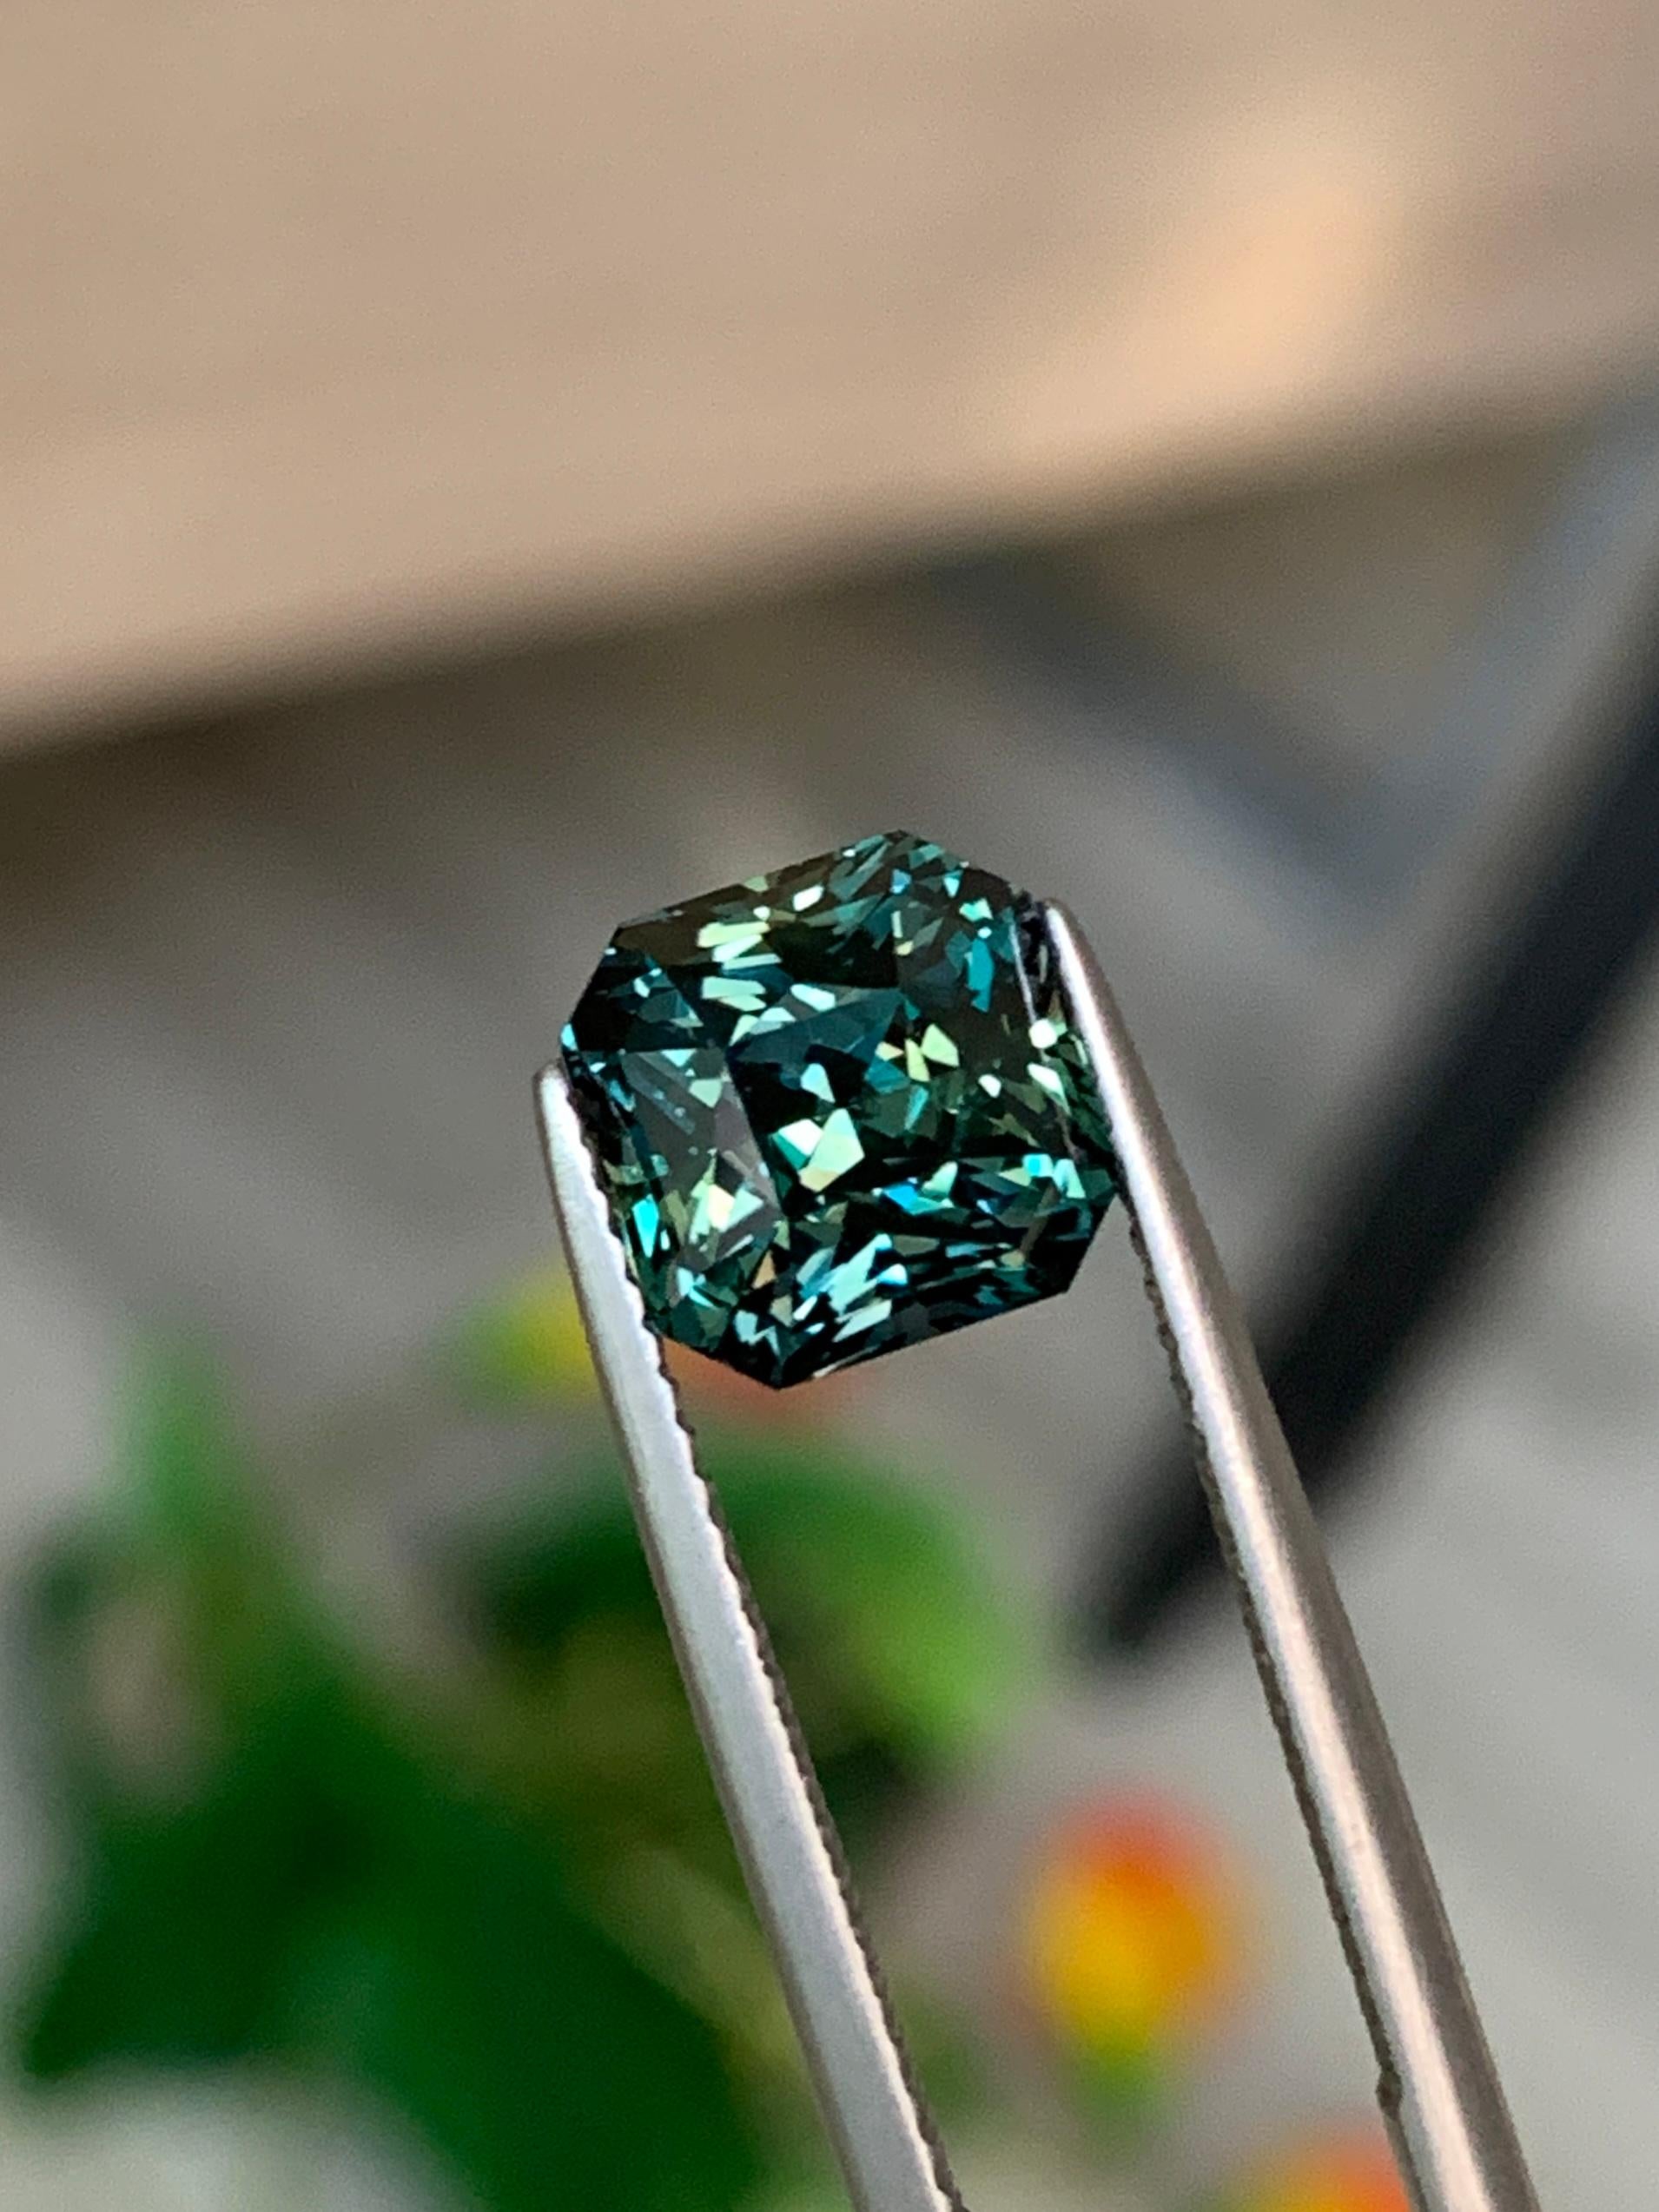 Octagon Cut AIGS Certified 5.19 Cts Unheated Premium Quality Rare Natural Teal Sapphire  For Sale